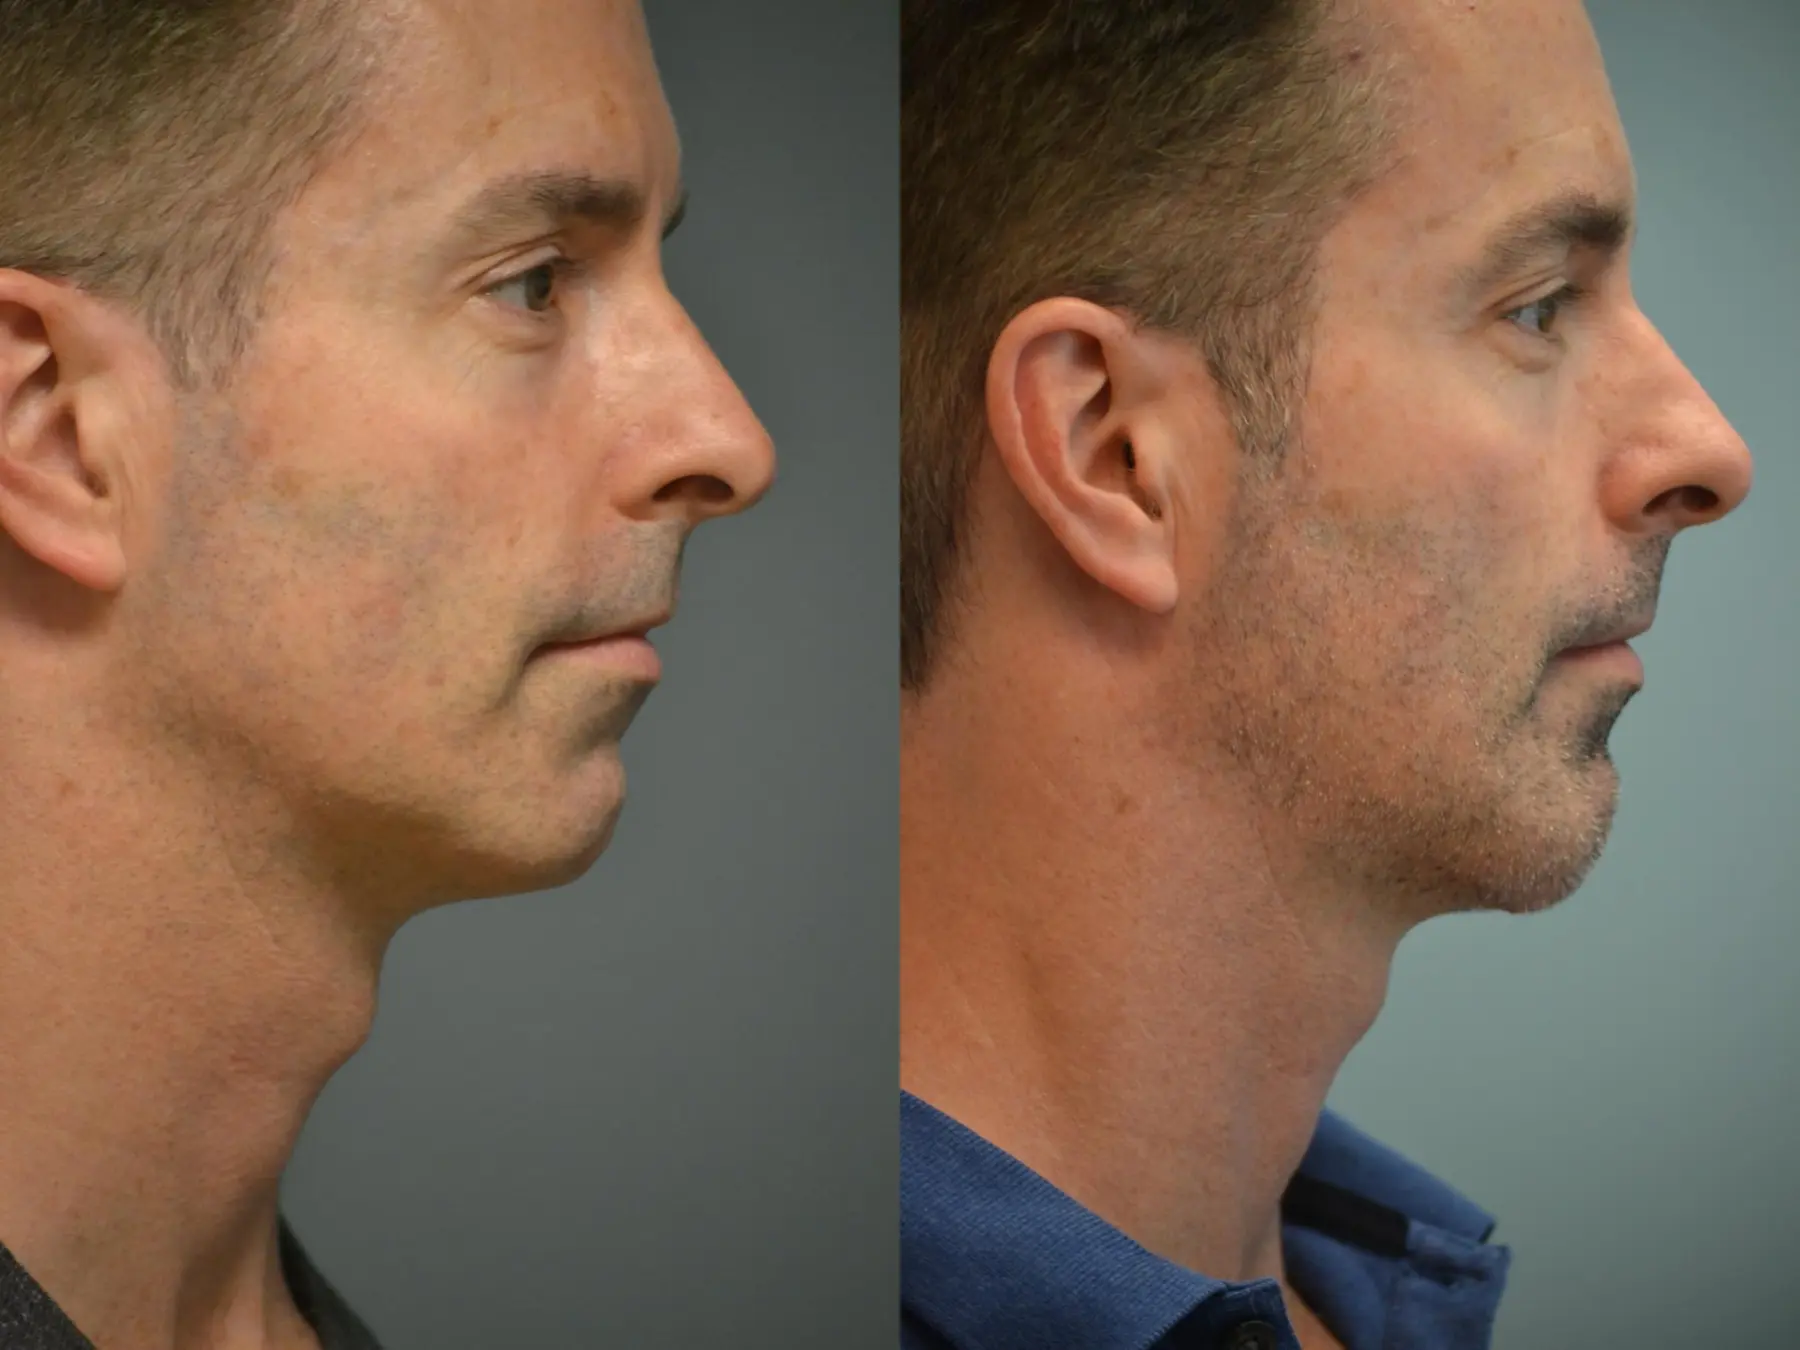 Chin Augmentation: Patient 1 - Before and After 3